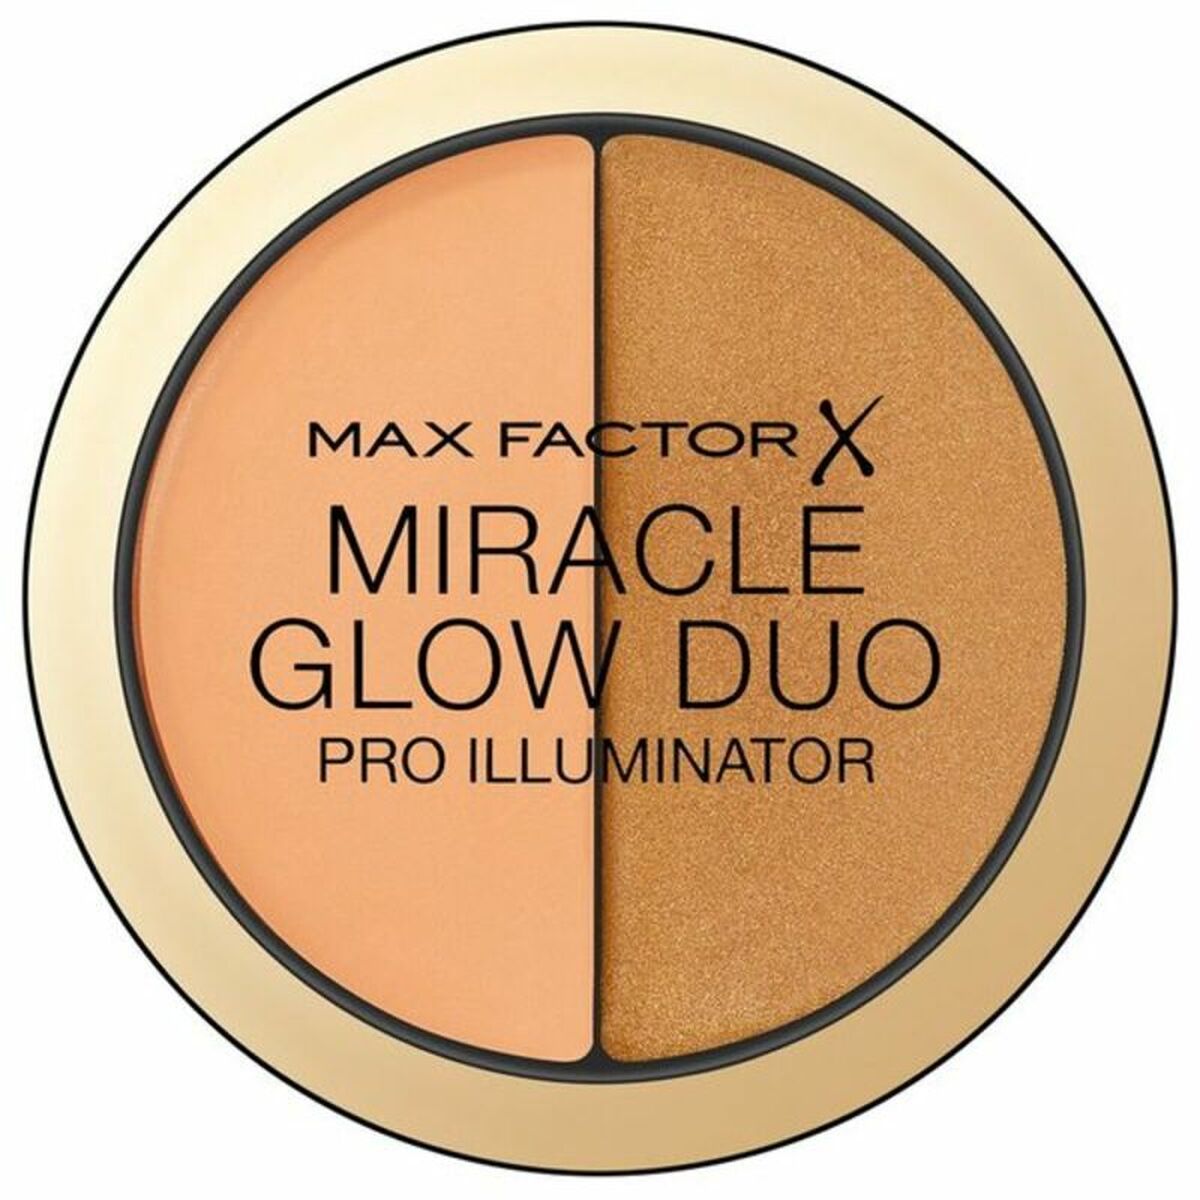 WHOREGER Miracle Glow Duo Max Factor